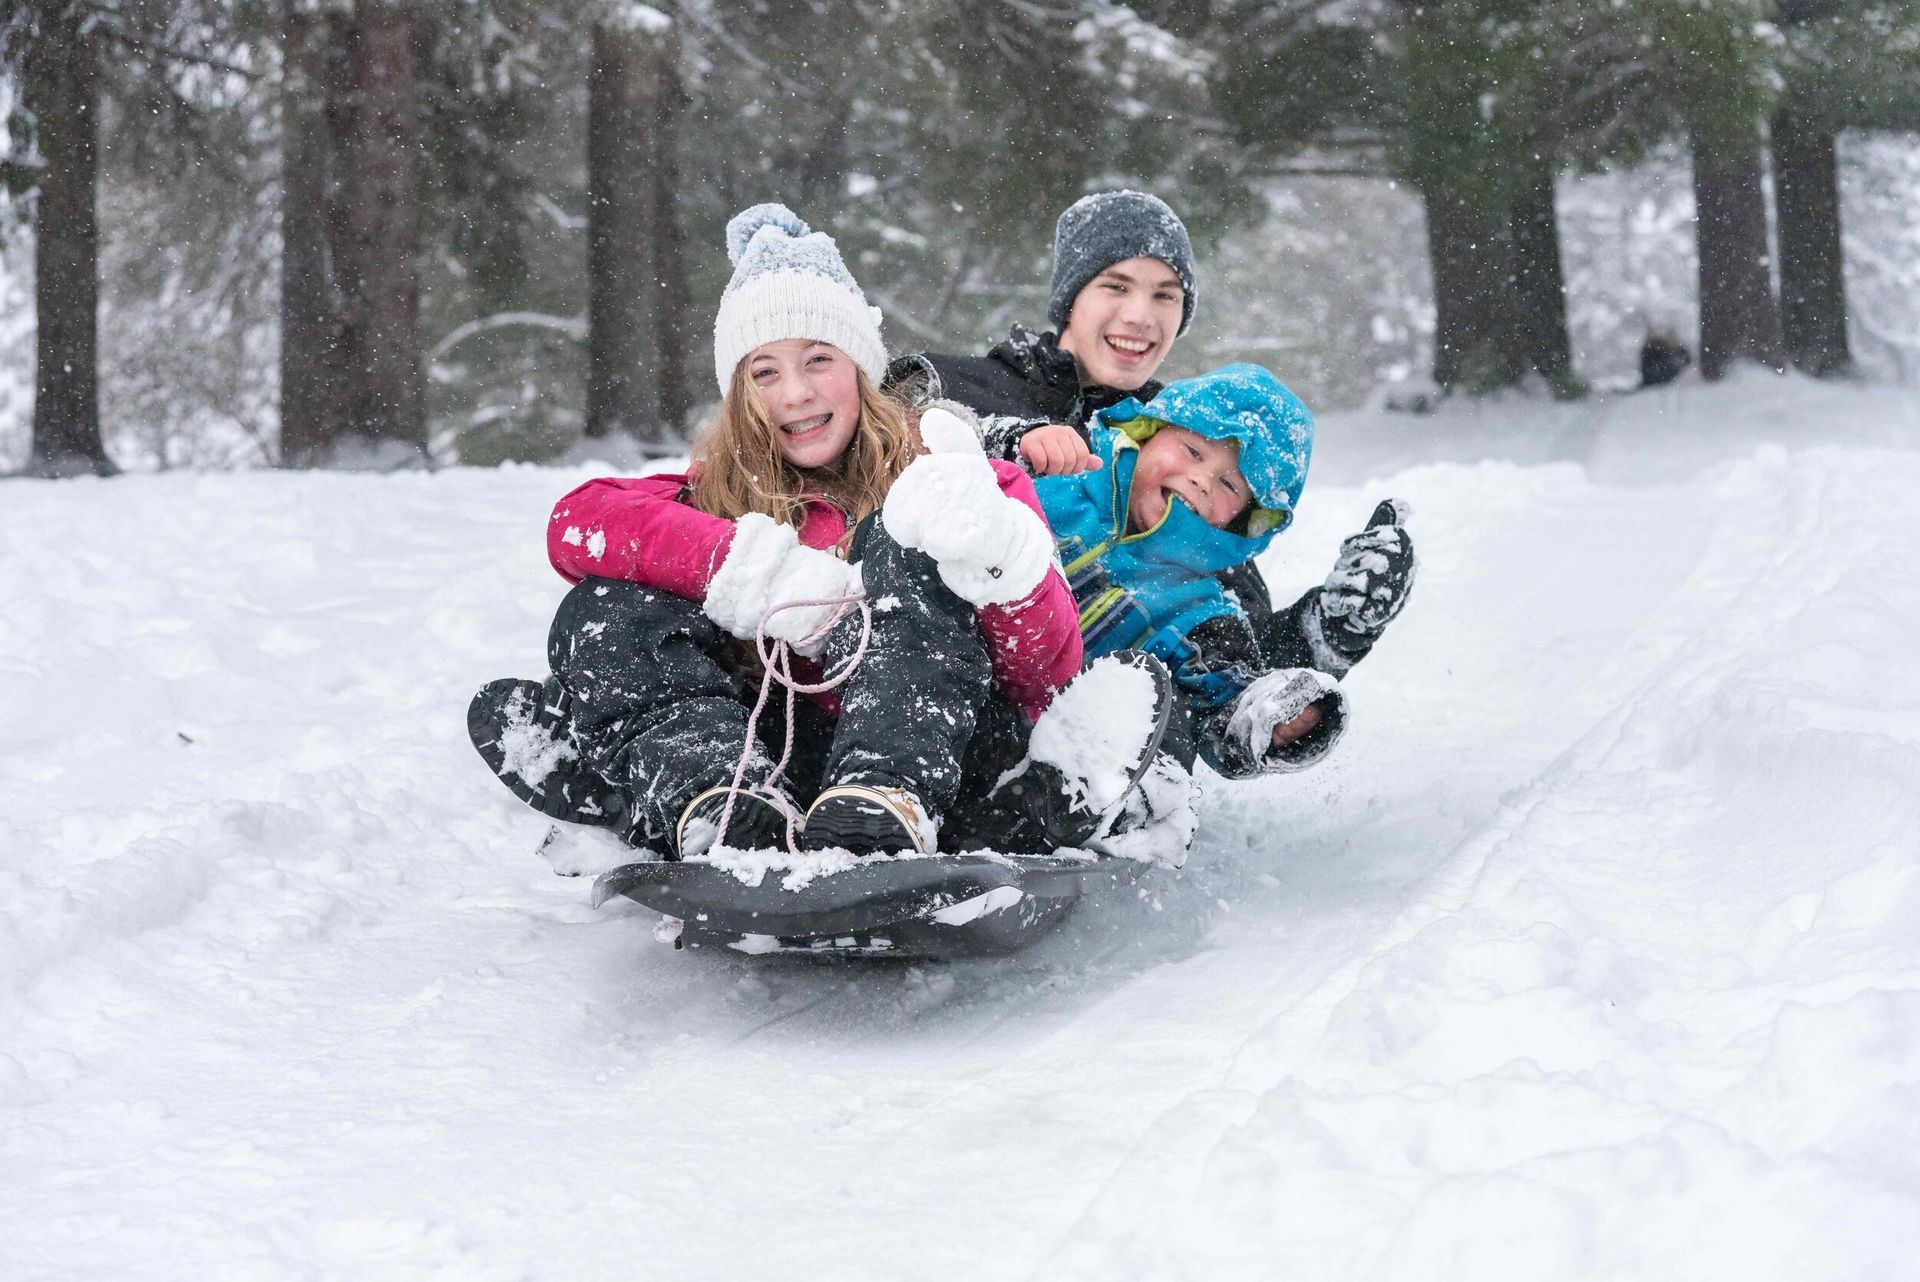 A group of children are sledding down a snow covered hill.